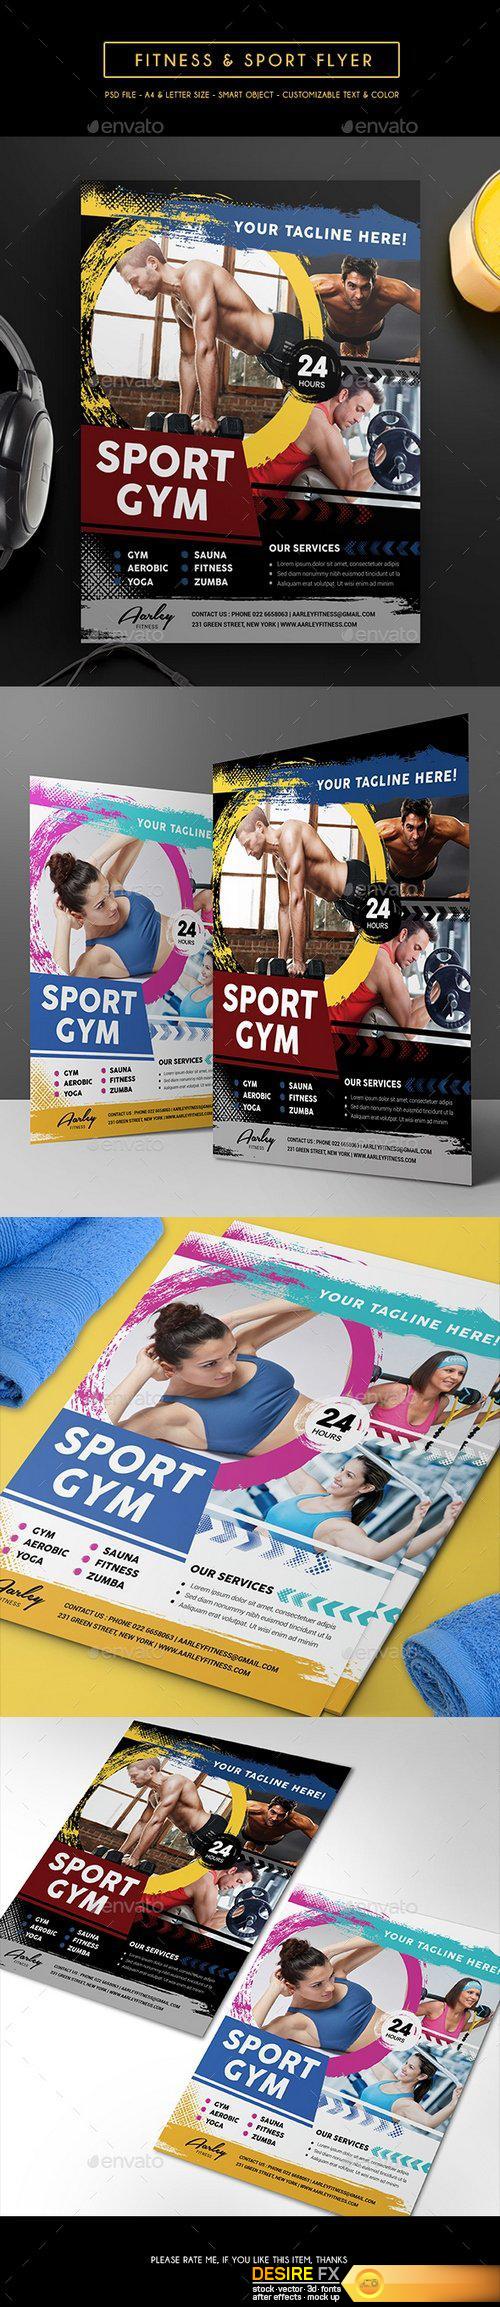 Graphicriver - Fitness & Sport Flyer 14355994